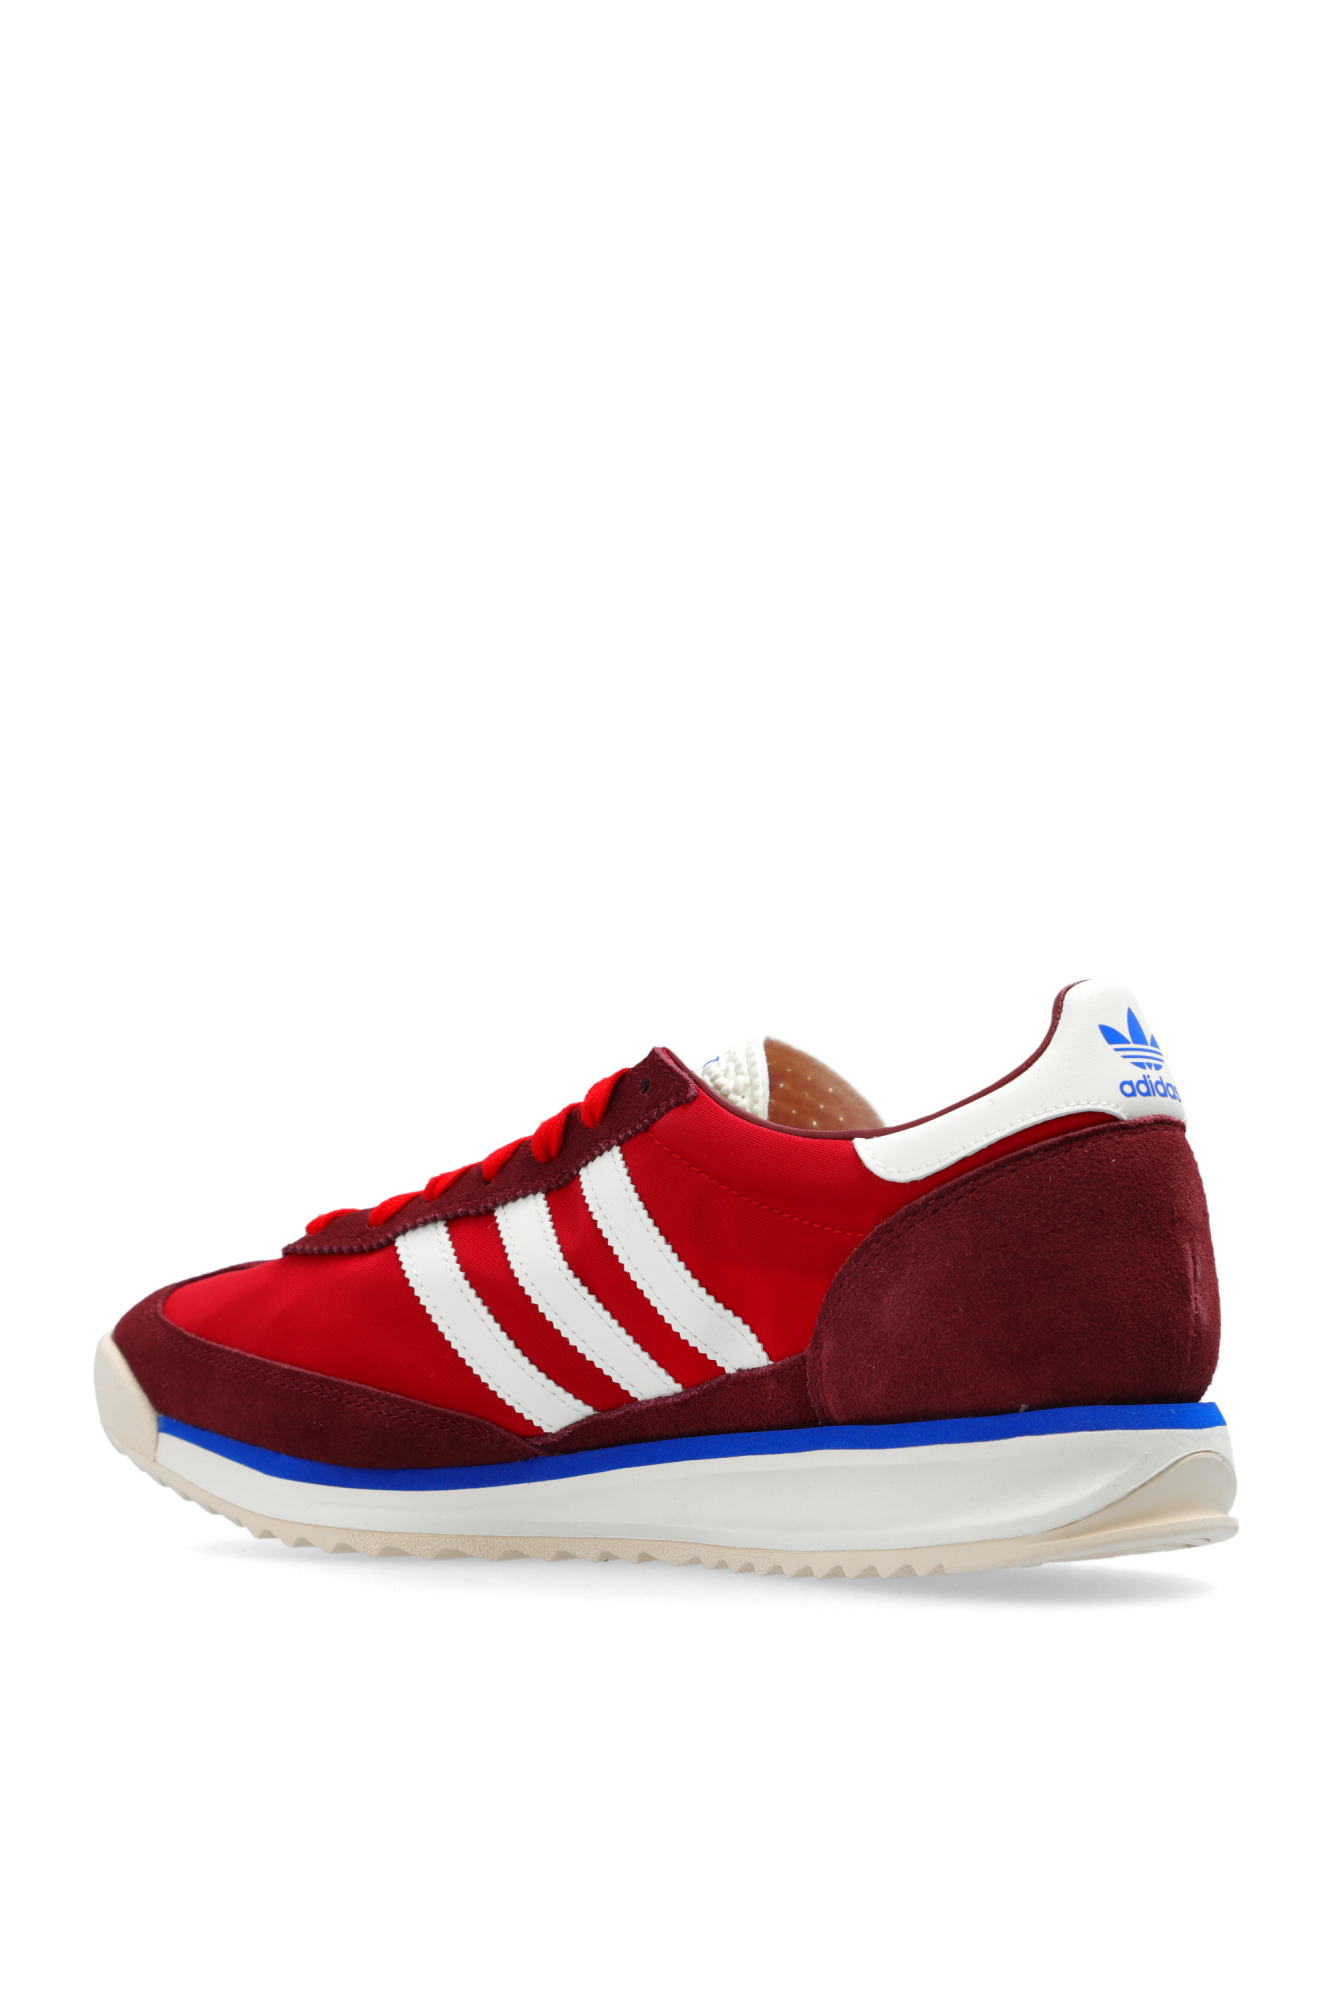 ADIDAS Originals ‘adidas ultra boost urban outfitters shoes women’ sports shoes